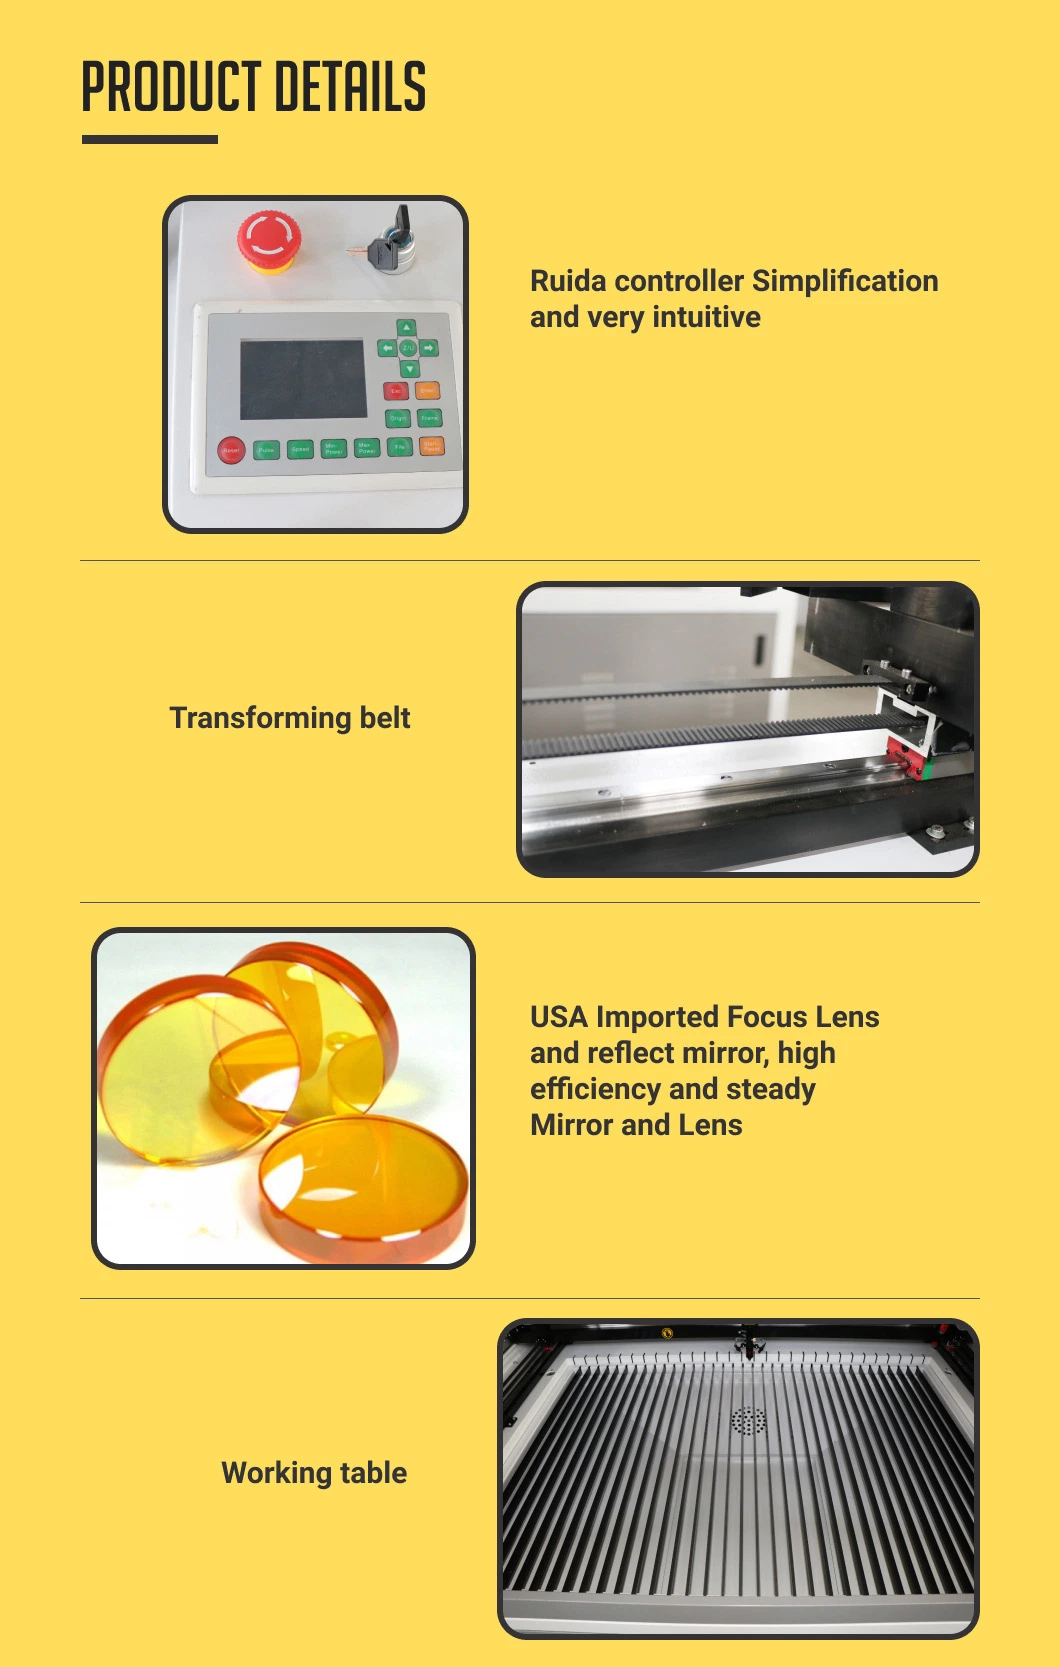 Double Laser Heads 1410 CO2 Laser Engraving Machine Laser Cutting Machine for Wood Acrylic MDF